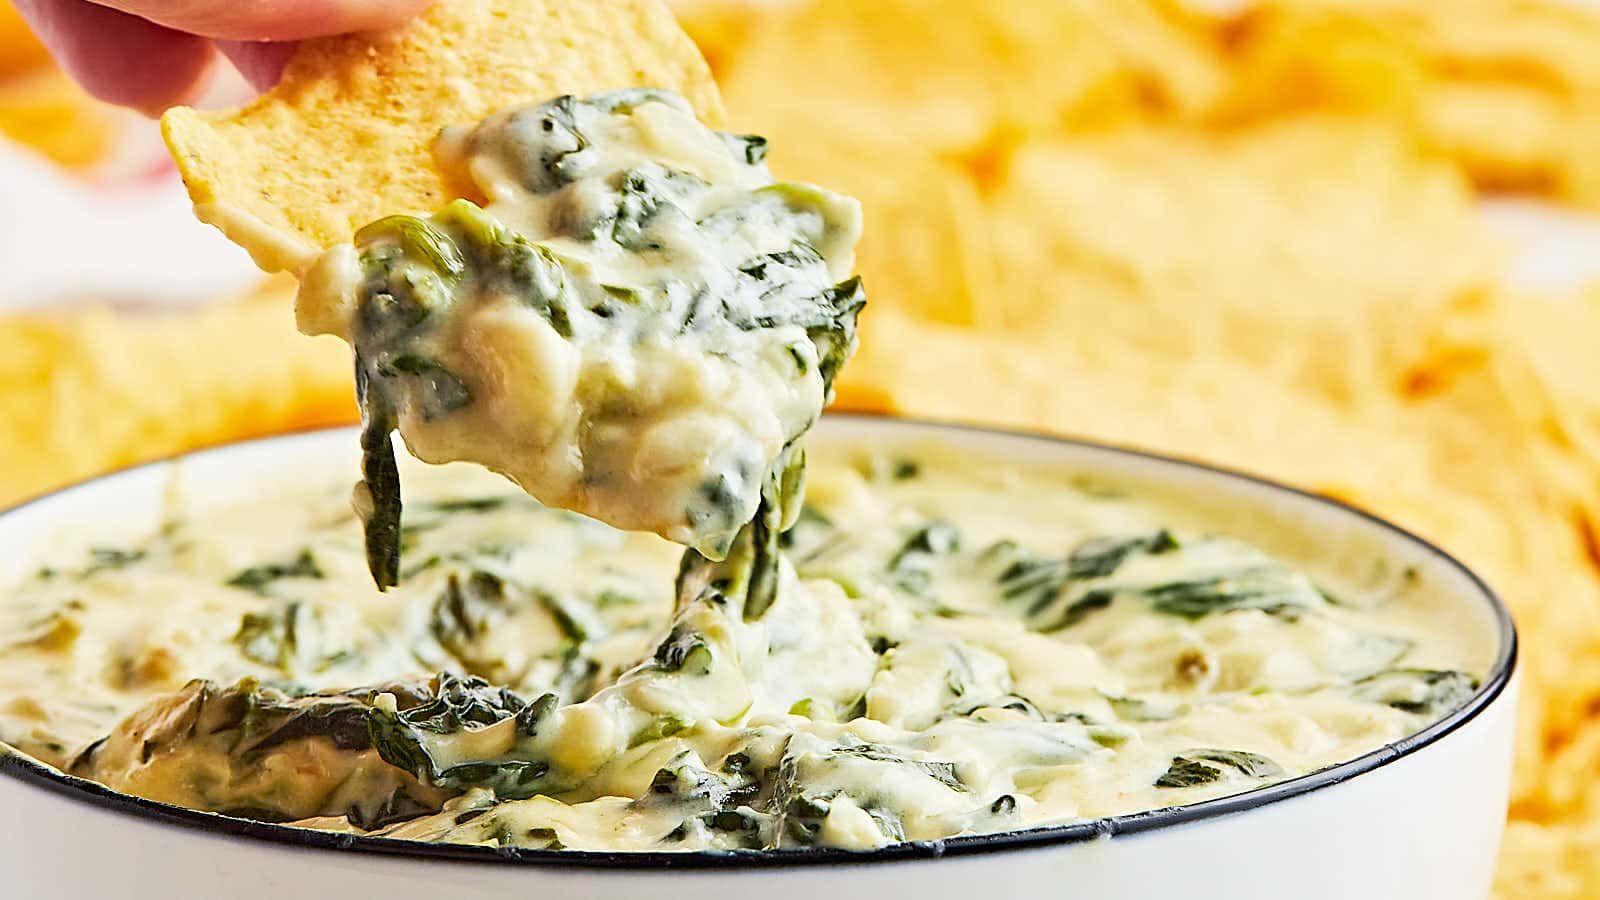 Spinach Dip recipe by Cheerful Cook.